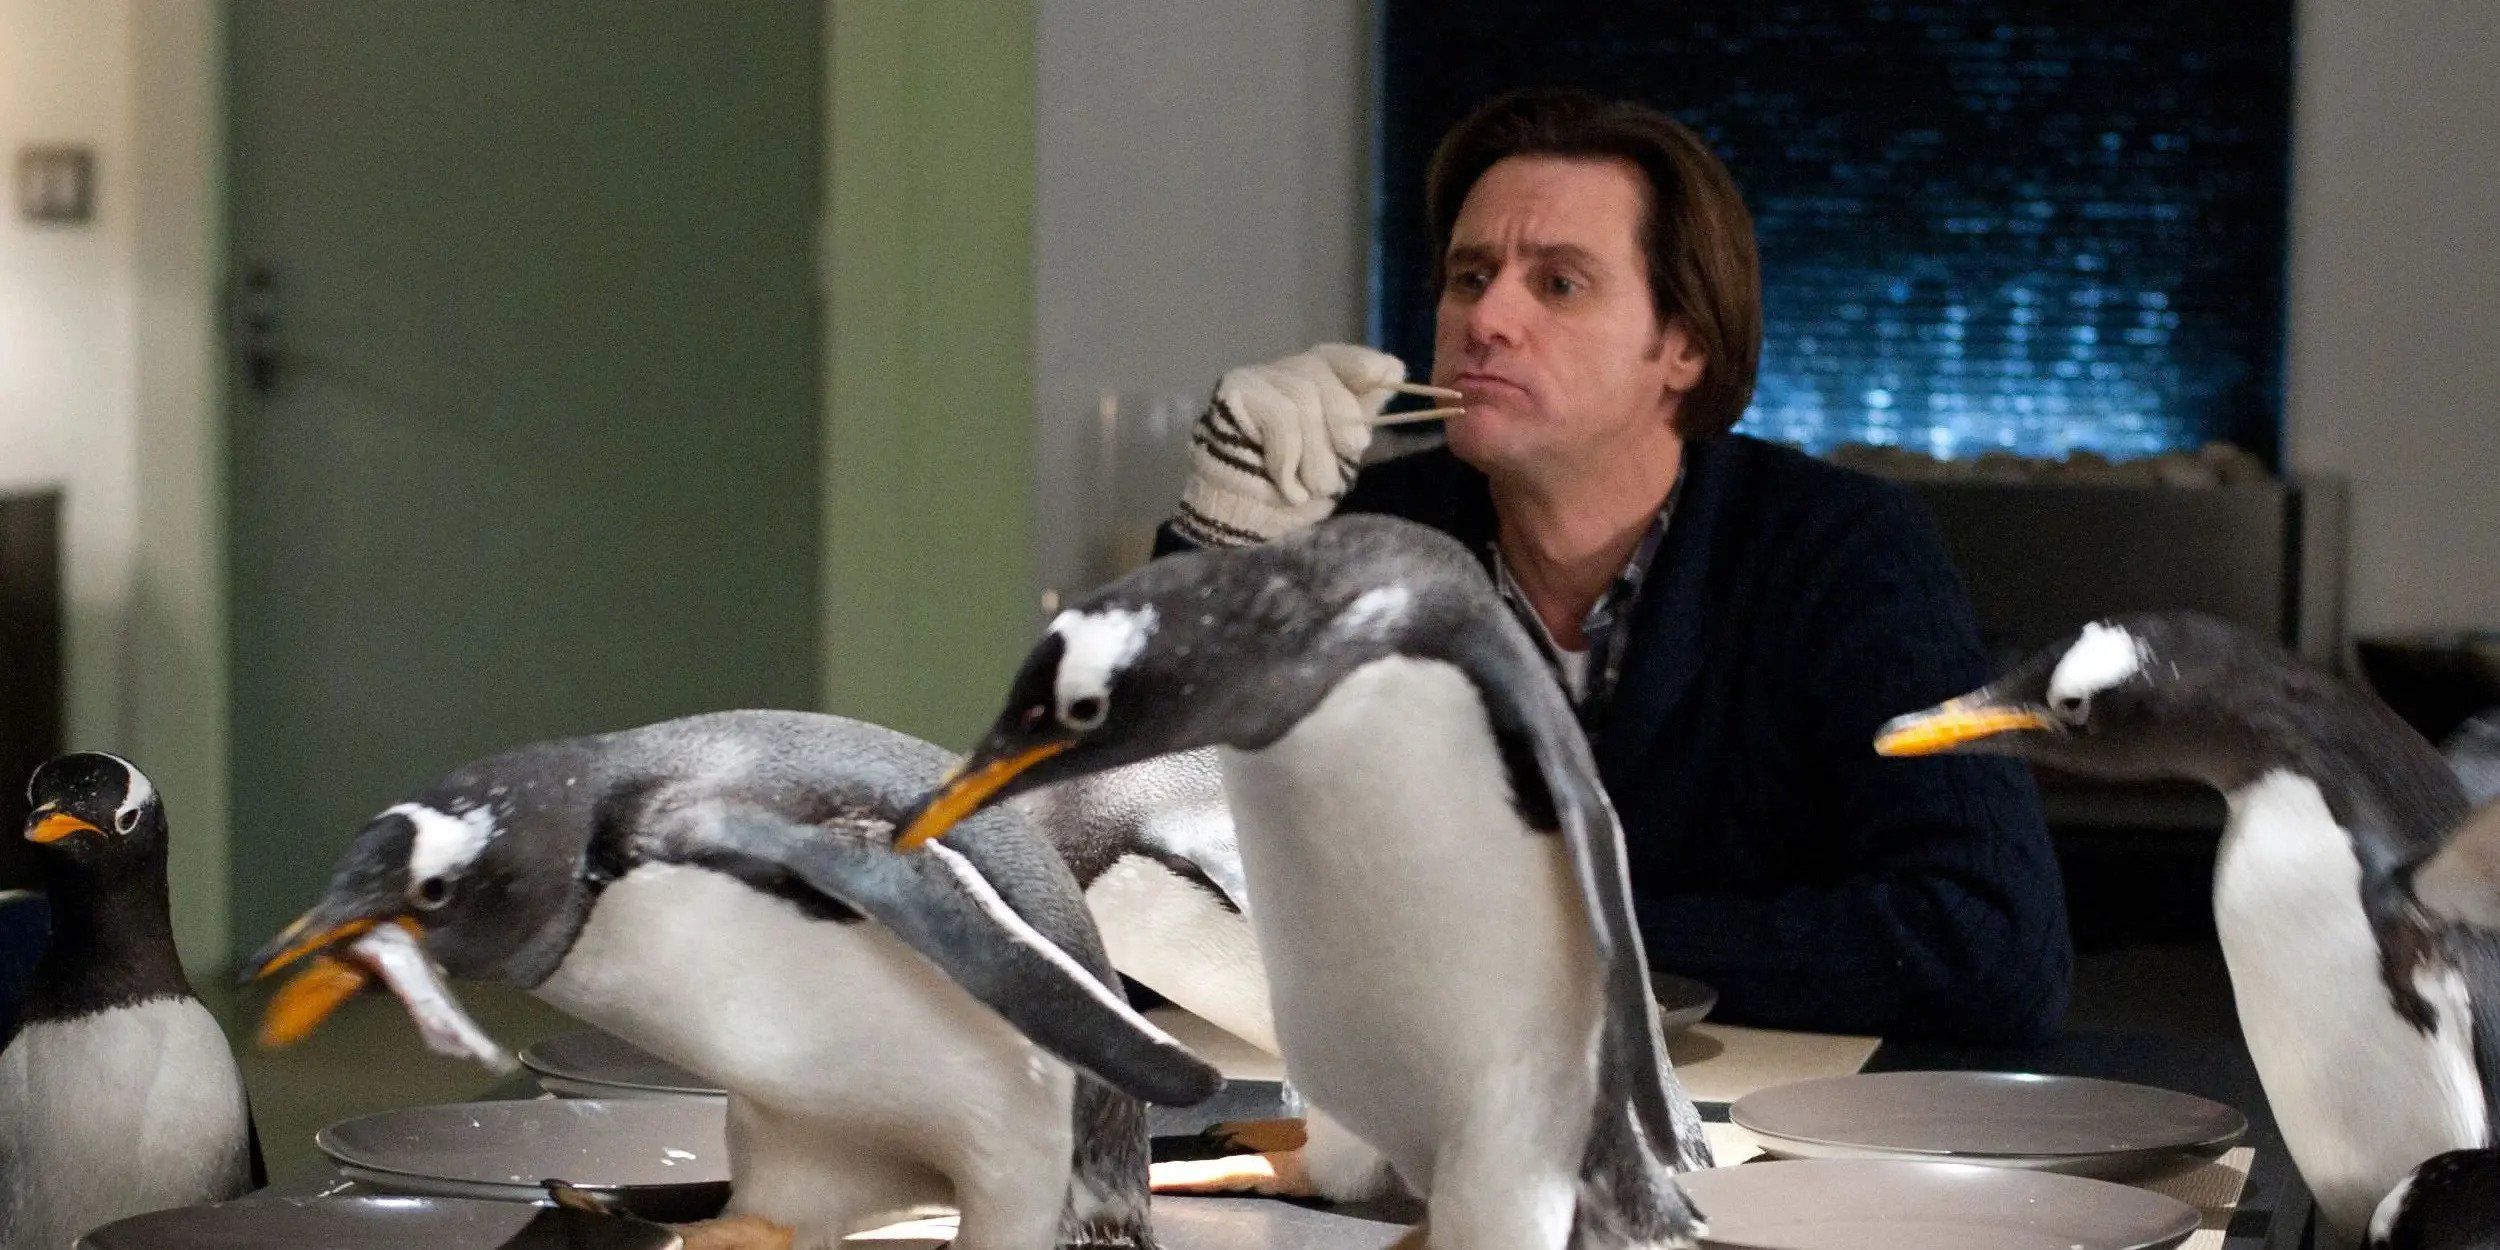 A still from the film 'Mr. Popper's Penguins' featuring Jim Carrey attempting to eat food while a group of penguins occupy the table.